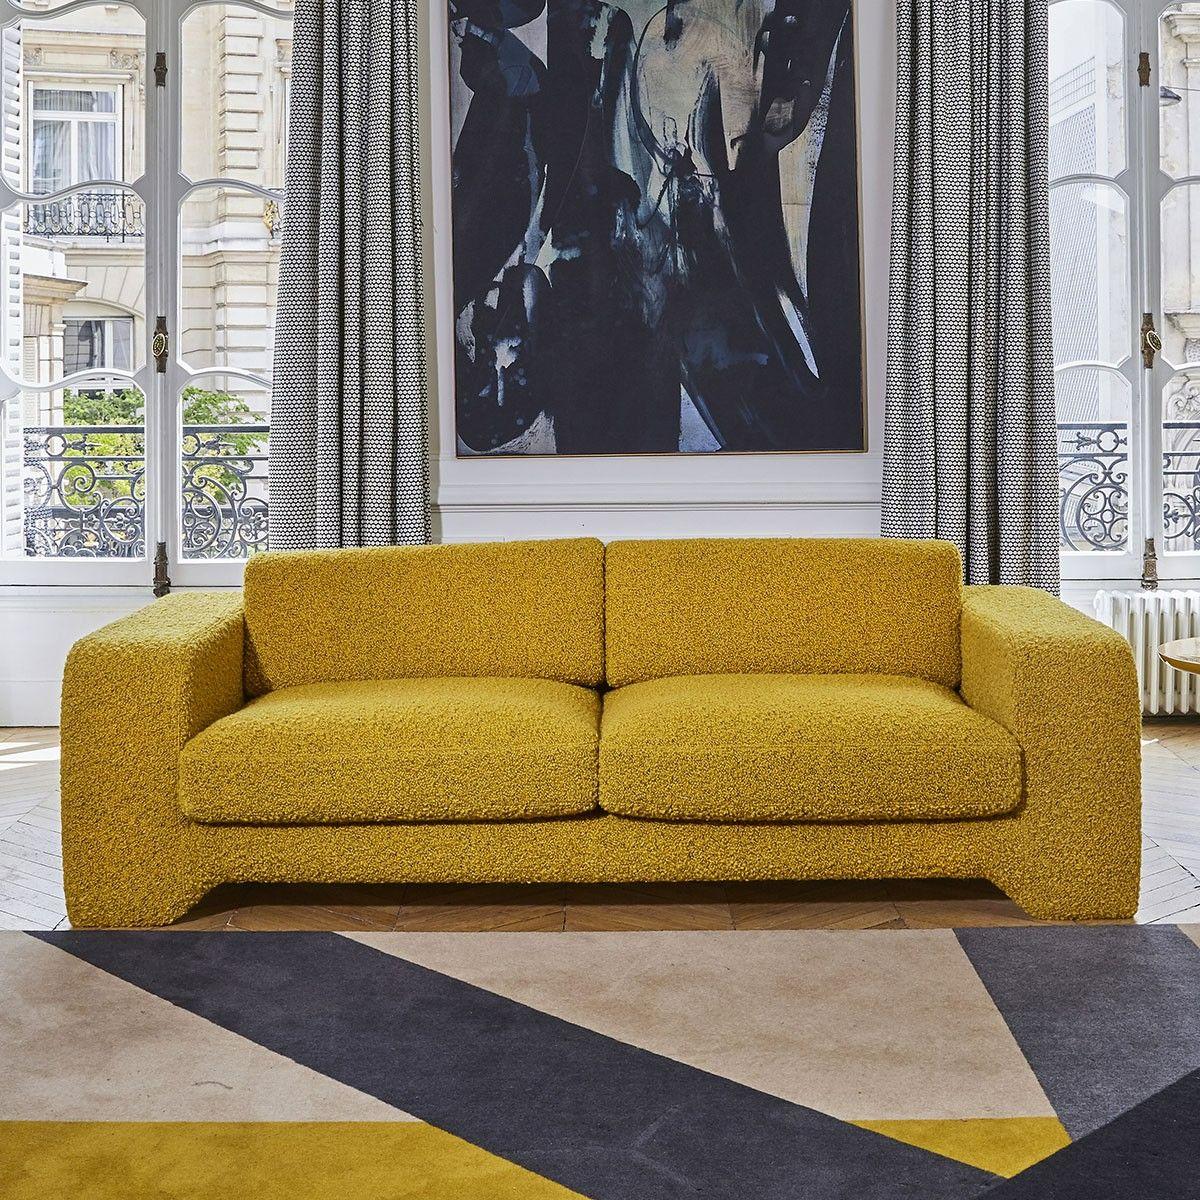 Popus Editions Giovanna 3 seater sofa in Saffron Antwerp Linen Upholstery

Giovanna is a sofa with a strong profile. A sober, plush line, with this famous detail that changes everything, so as not to forget its strength of character and this